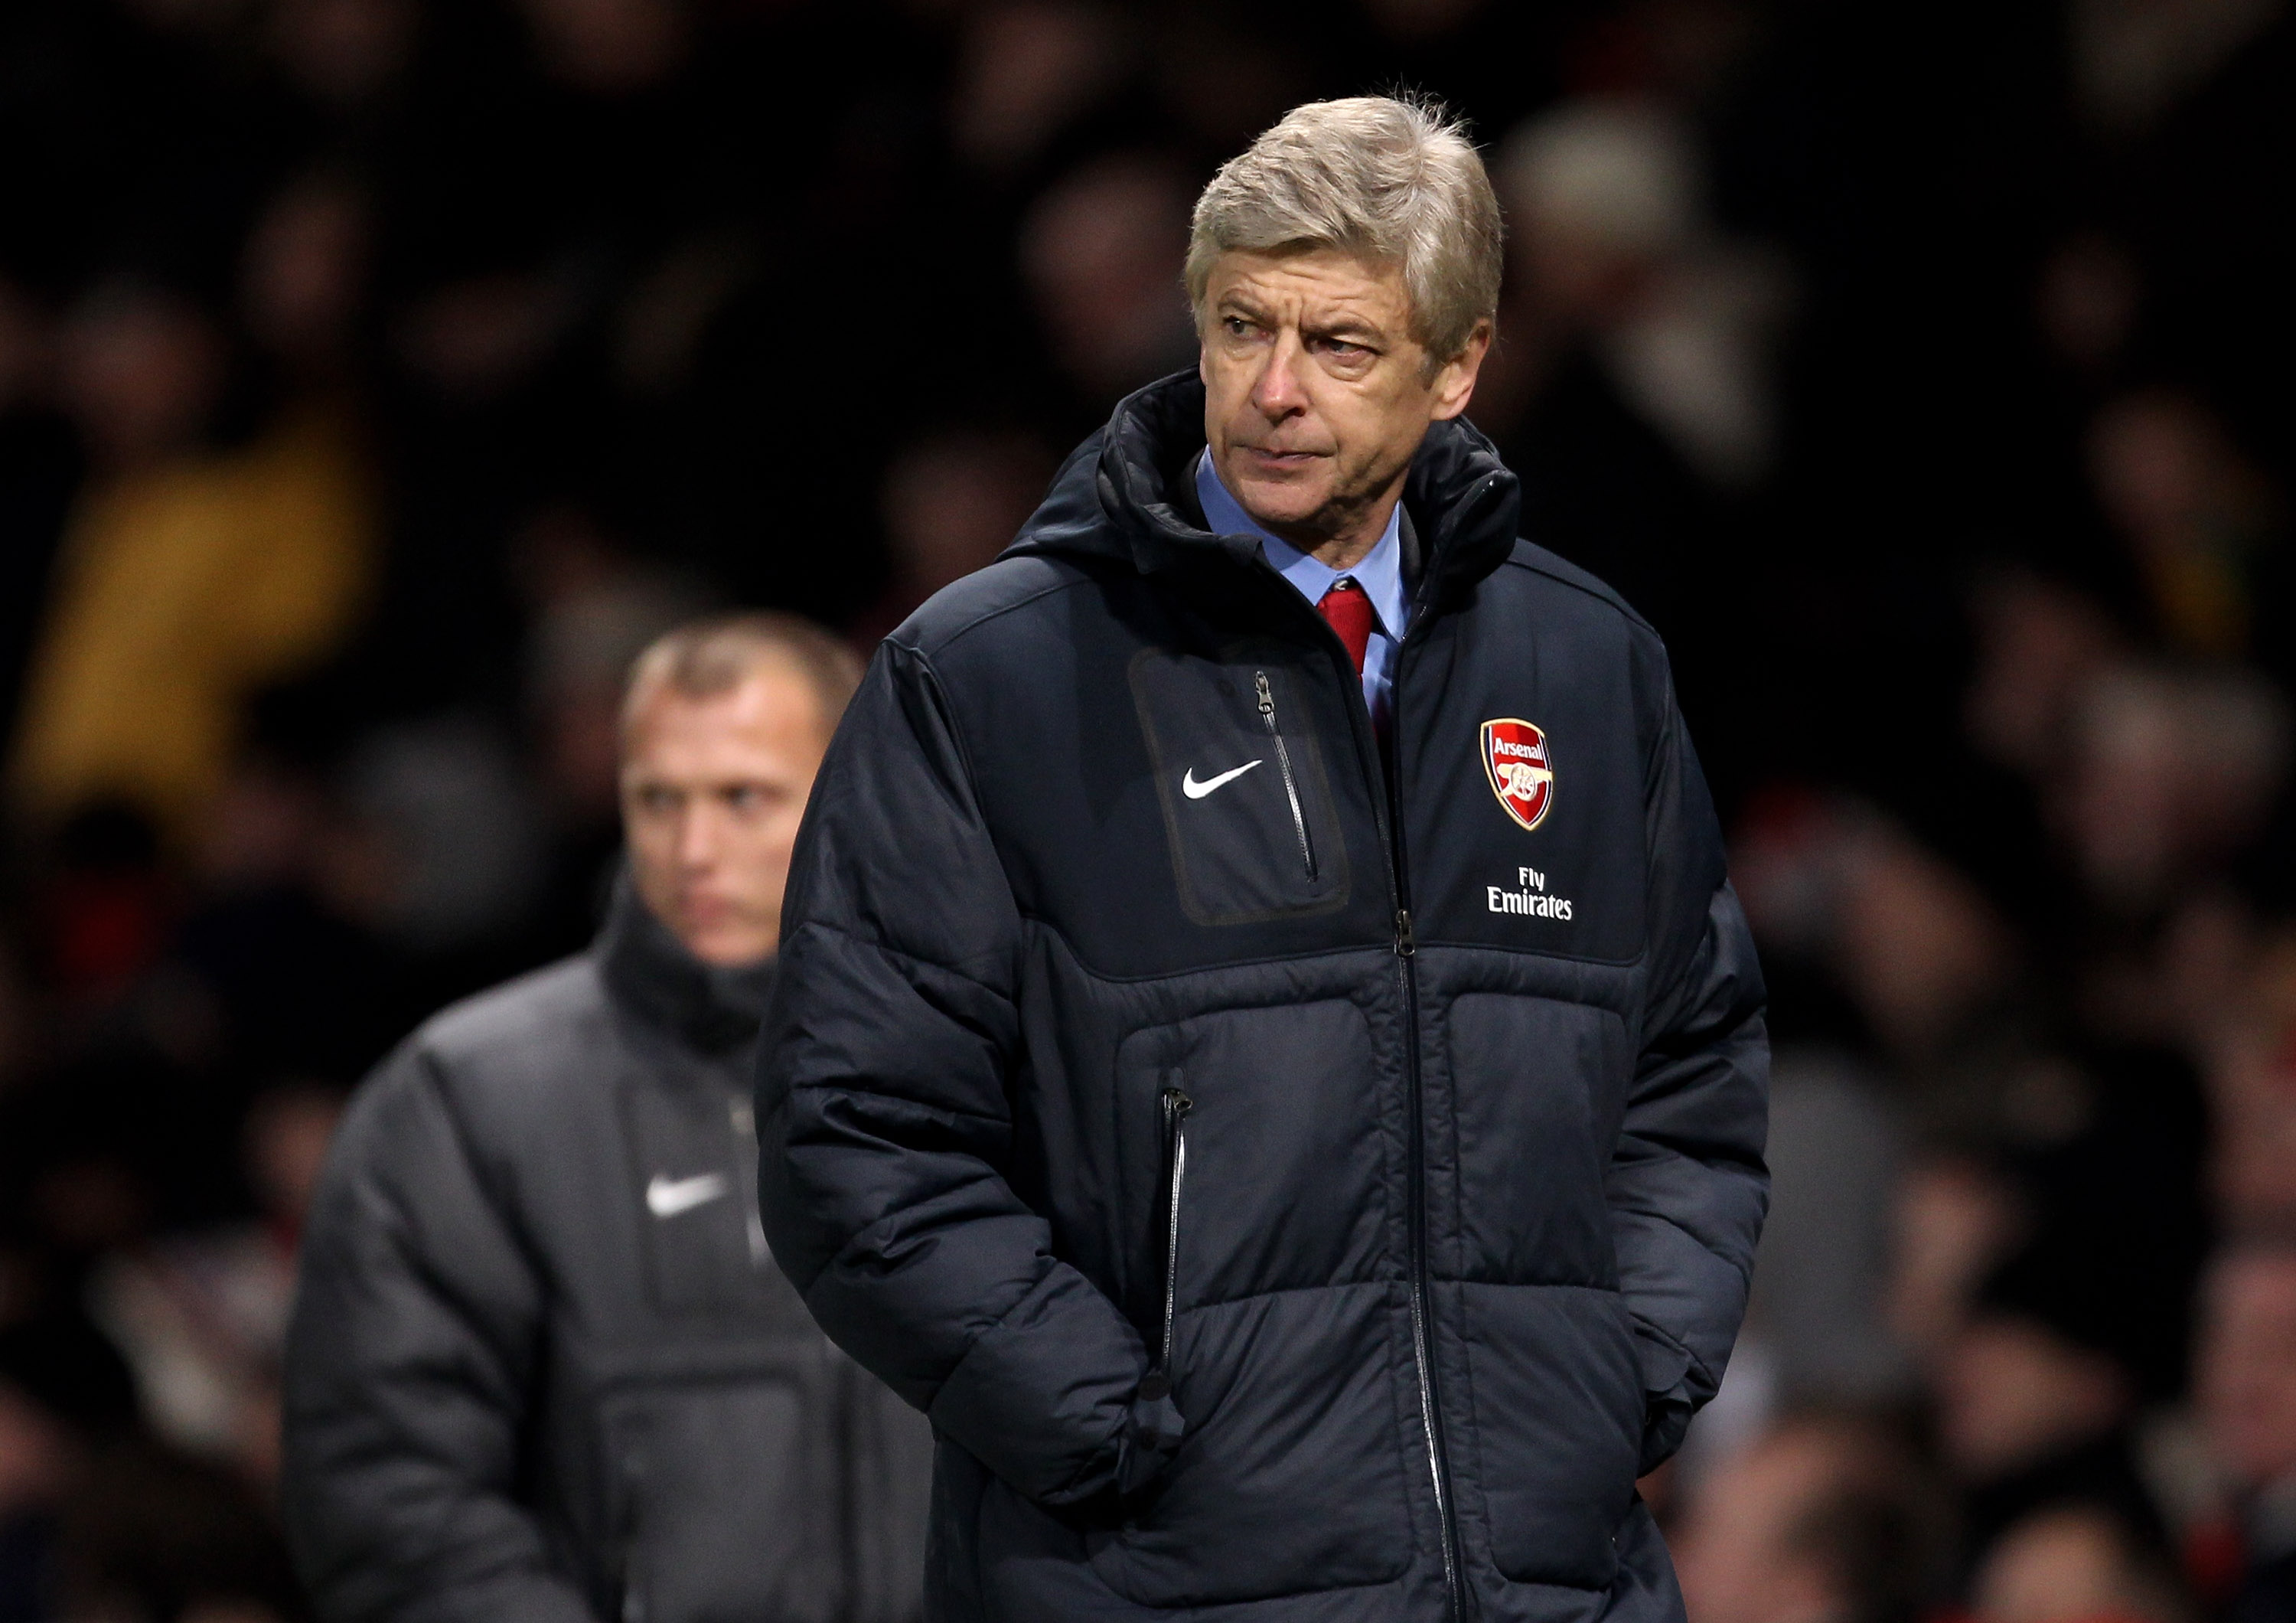 MANCHESTER, ENGLAND - DECEMBER 13:  Arsenal Manager Arsene Wenger heads for the dressing room at half time during the Barclays Premier League match between Manchester United and Arsenal at Old Trafford on December 13, 2010 in Manchester, England.  (Photo